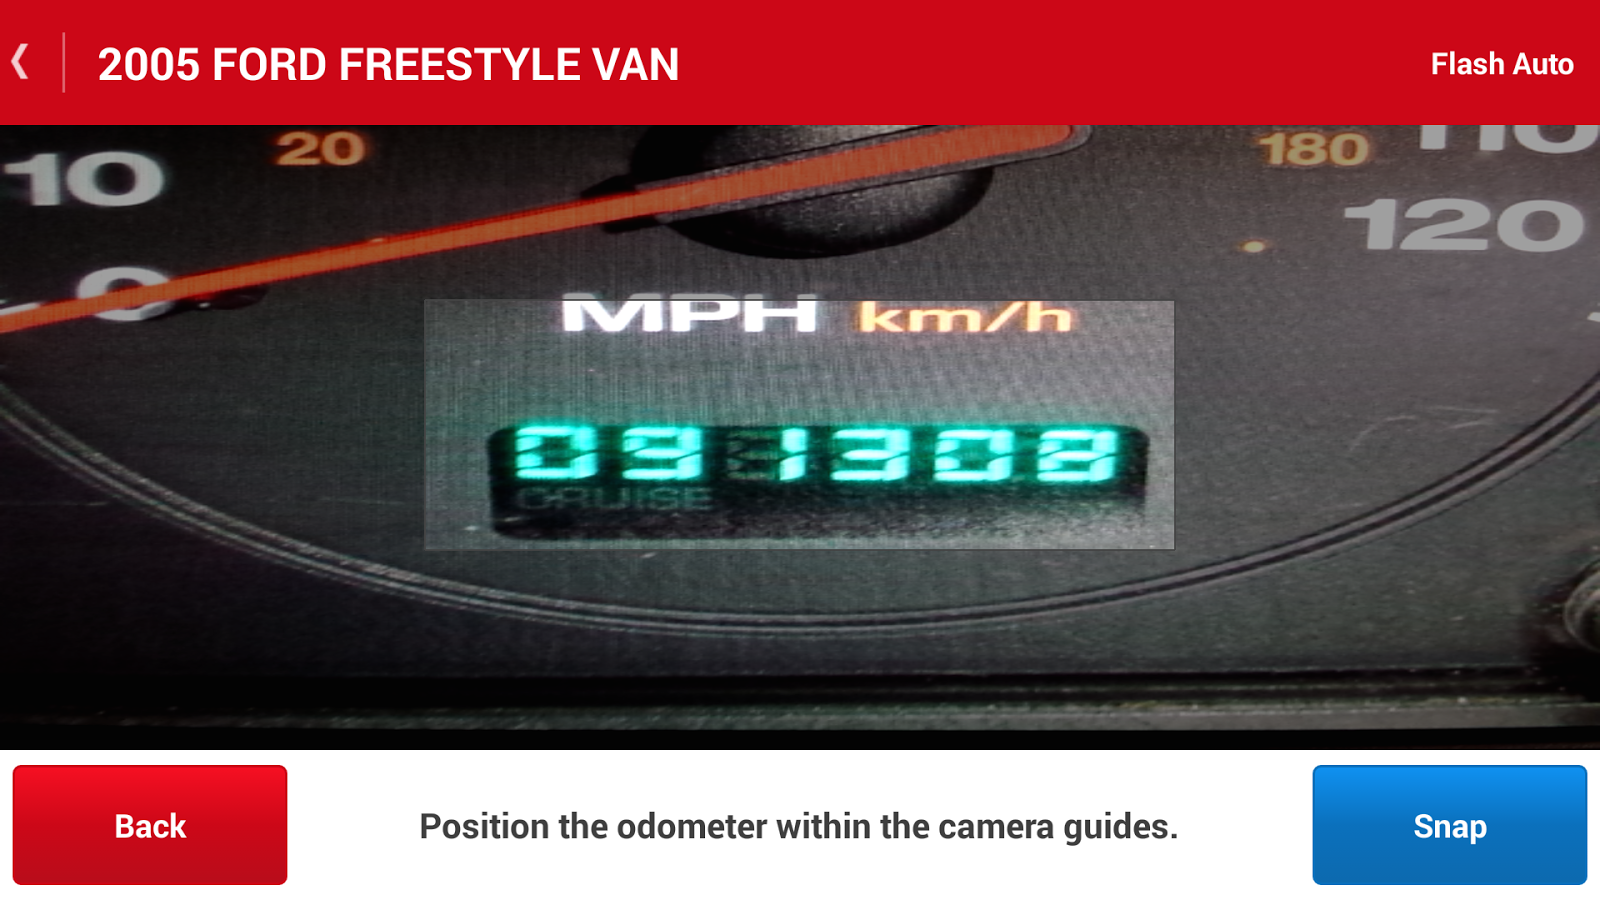 ... report customers the ability to report an odometer reading via an